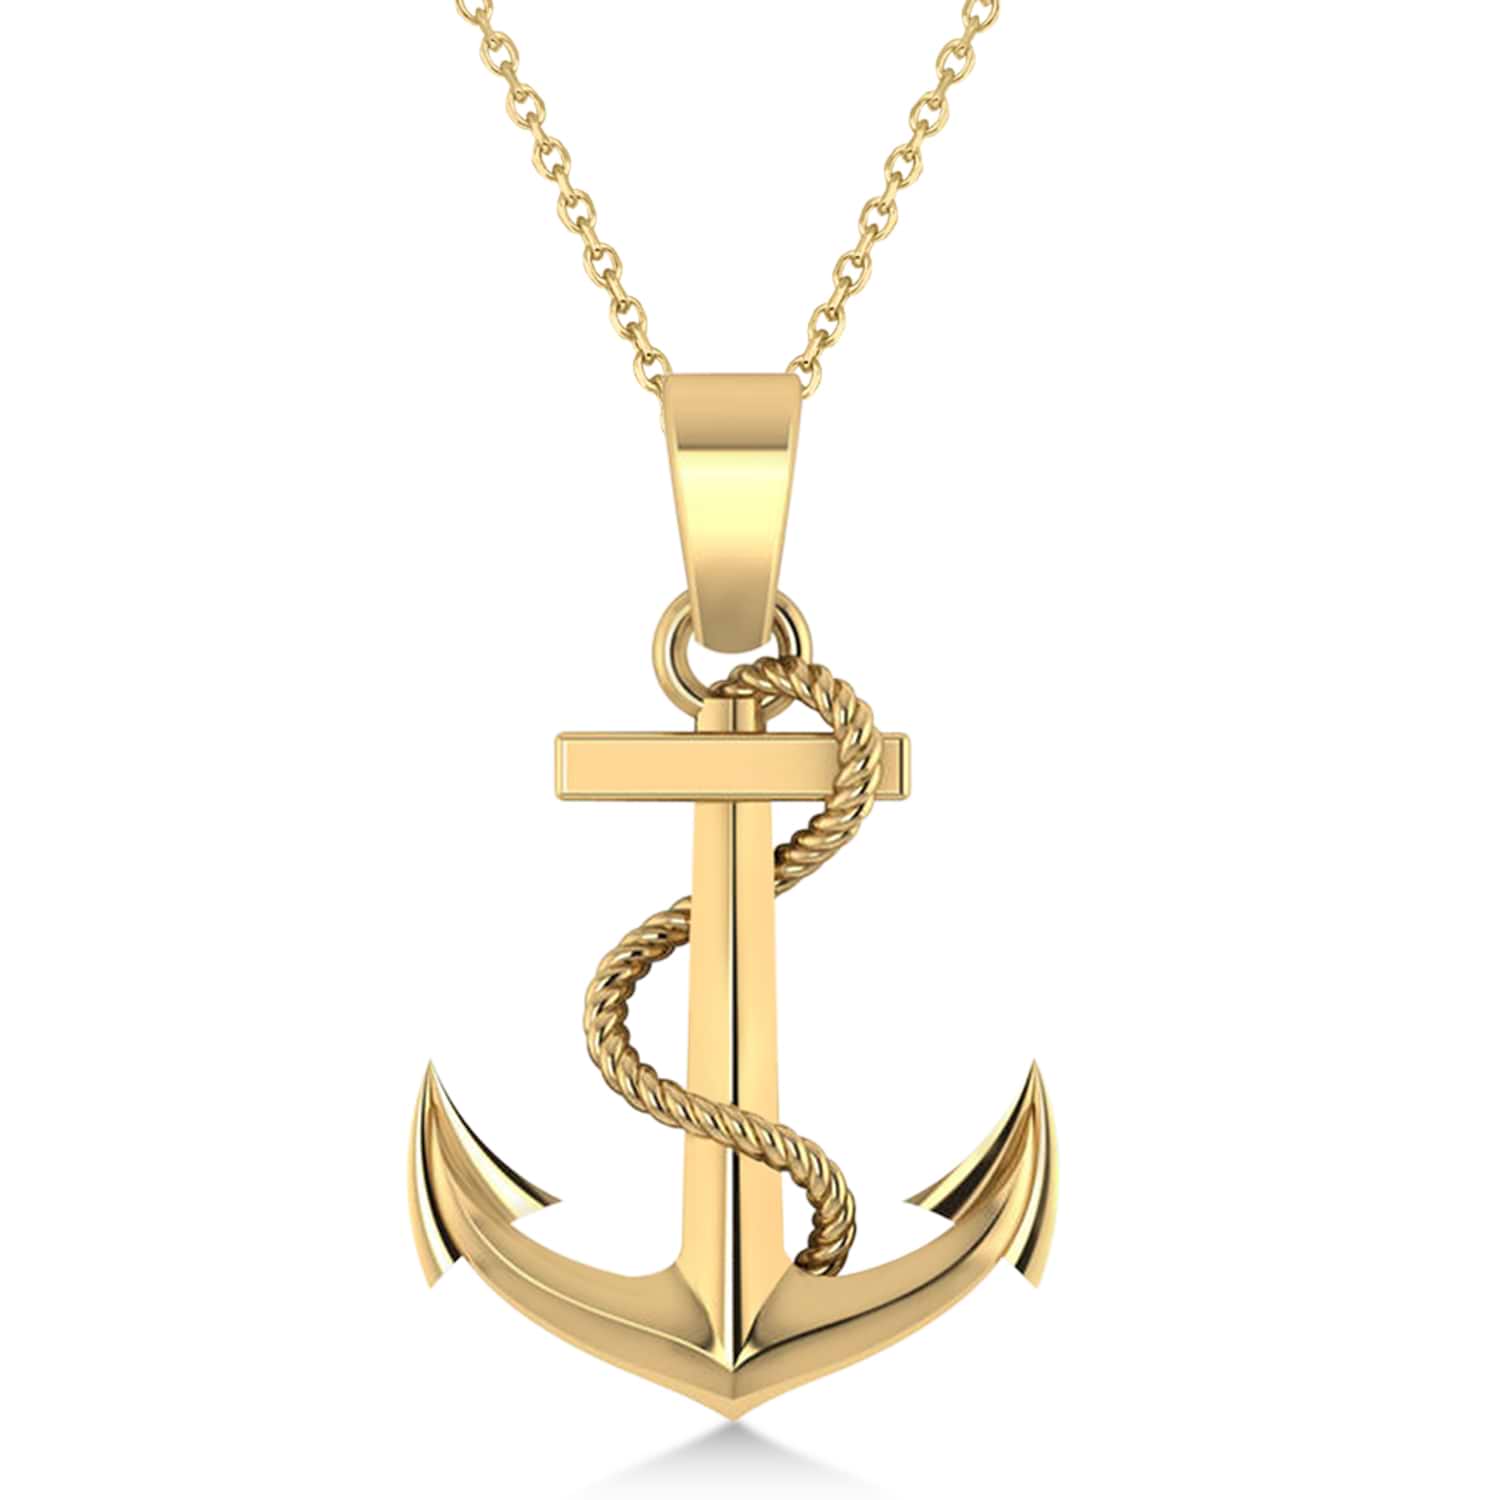 Men's Anchor Pendant Necklace Rope Design 14k Yellow Gold Necklace